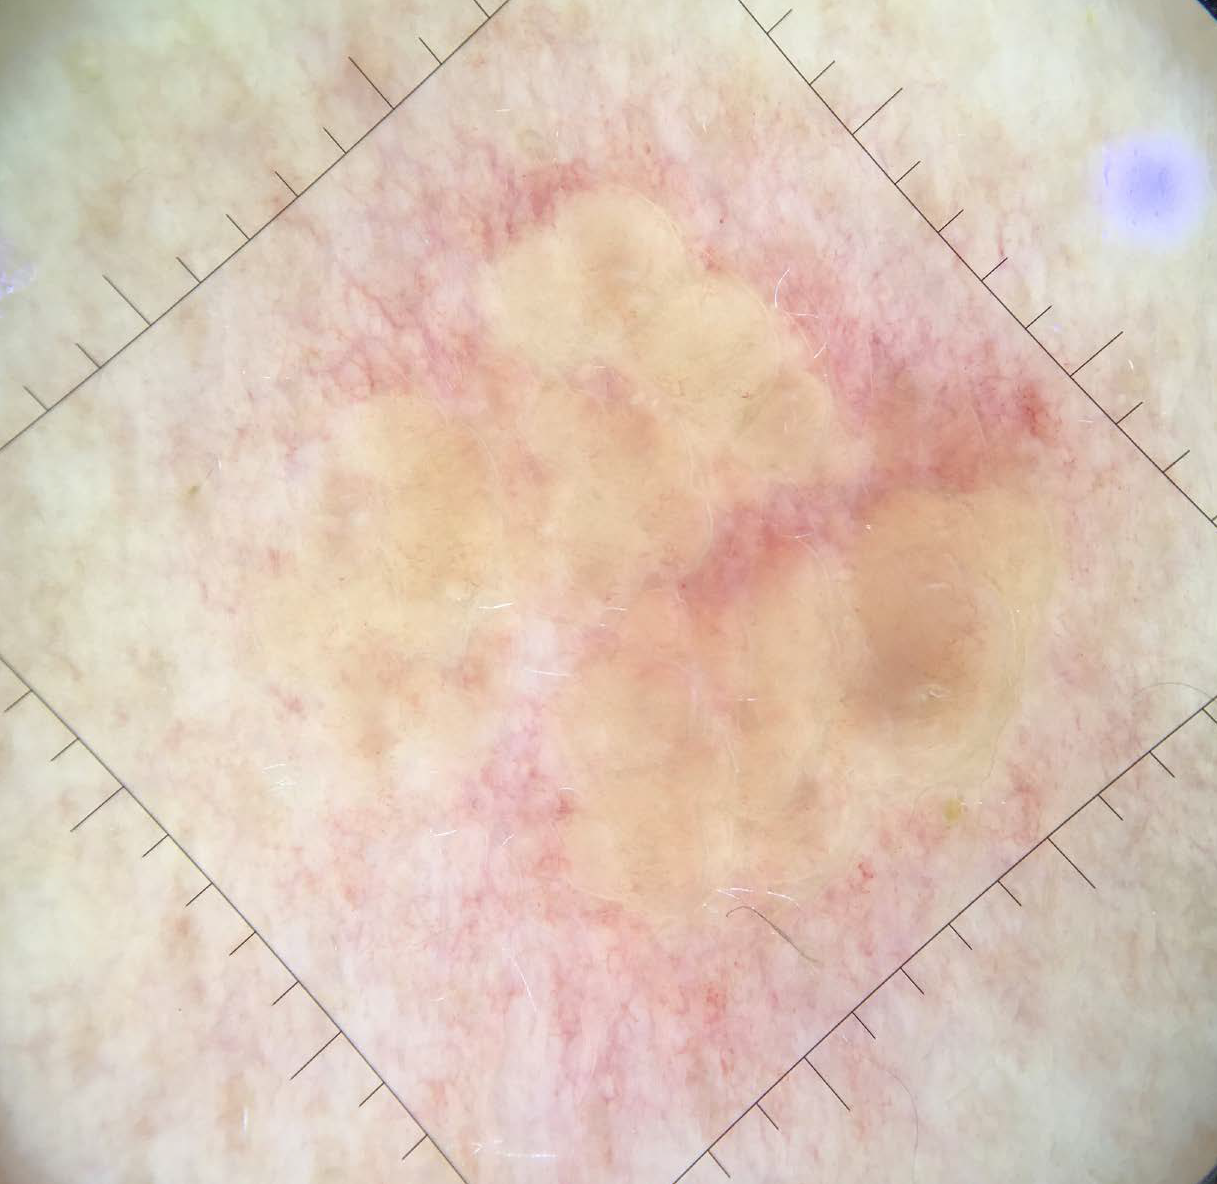 Yellow discoloration evident on applying contact dermoscopy(Image taken with Handyscope®, Fotofinder) ×10